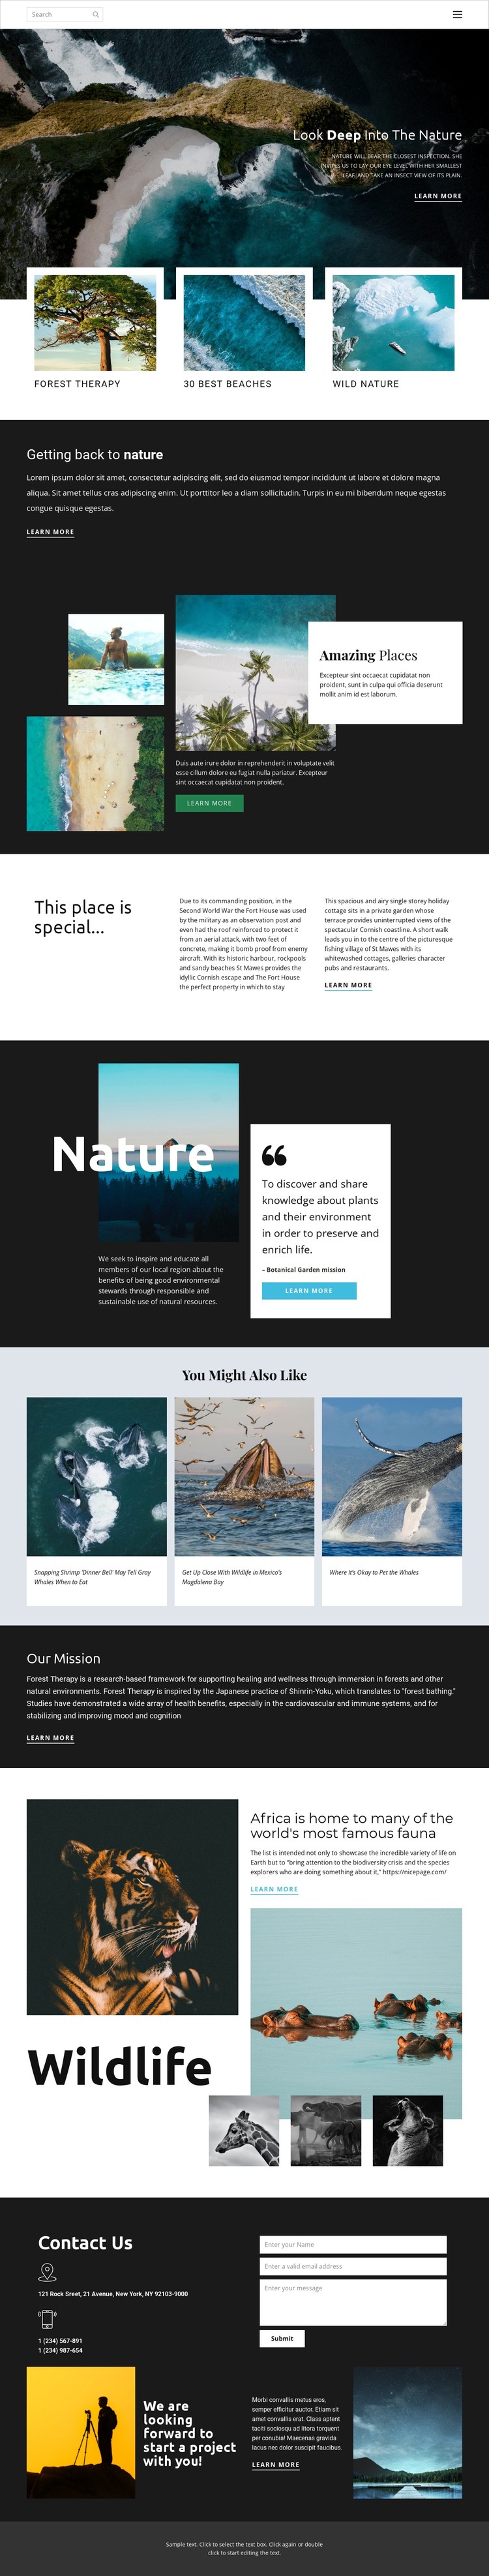 Exploring wildlife and nature CSS Template